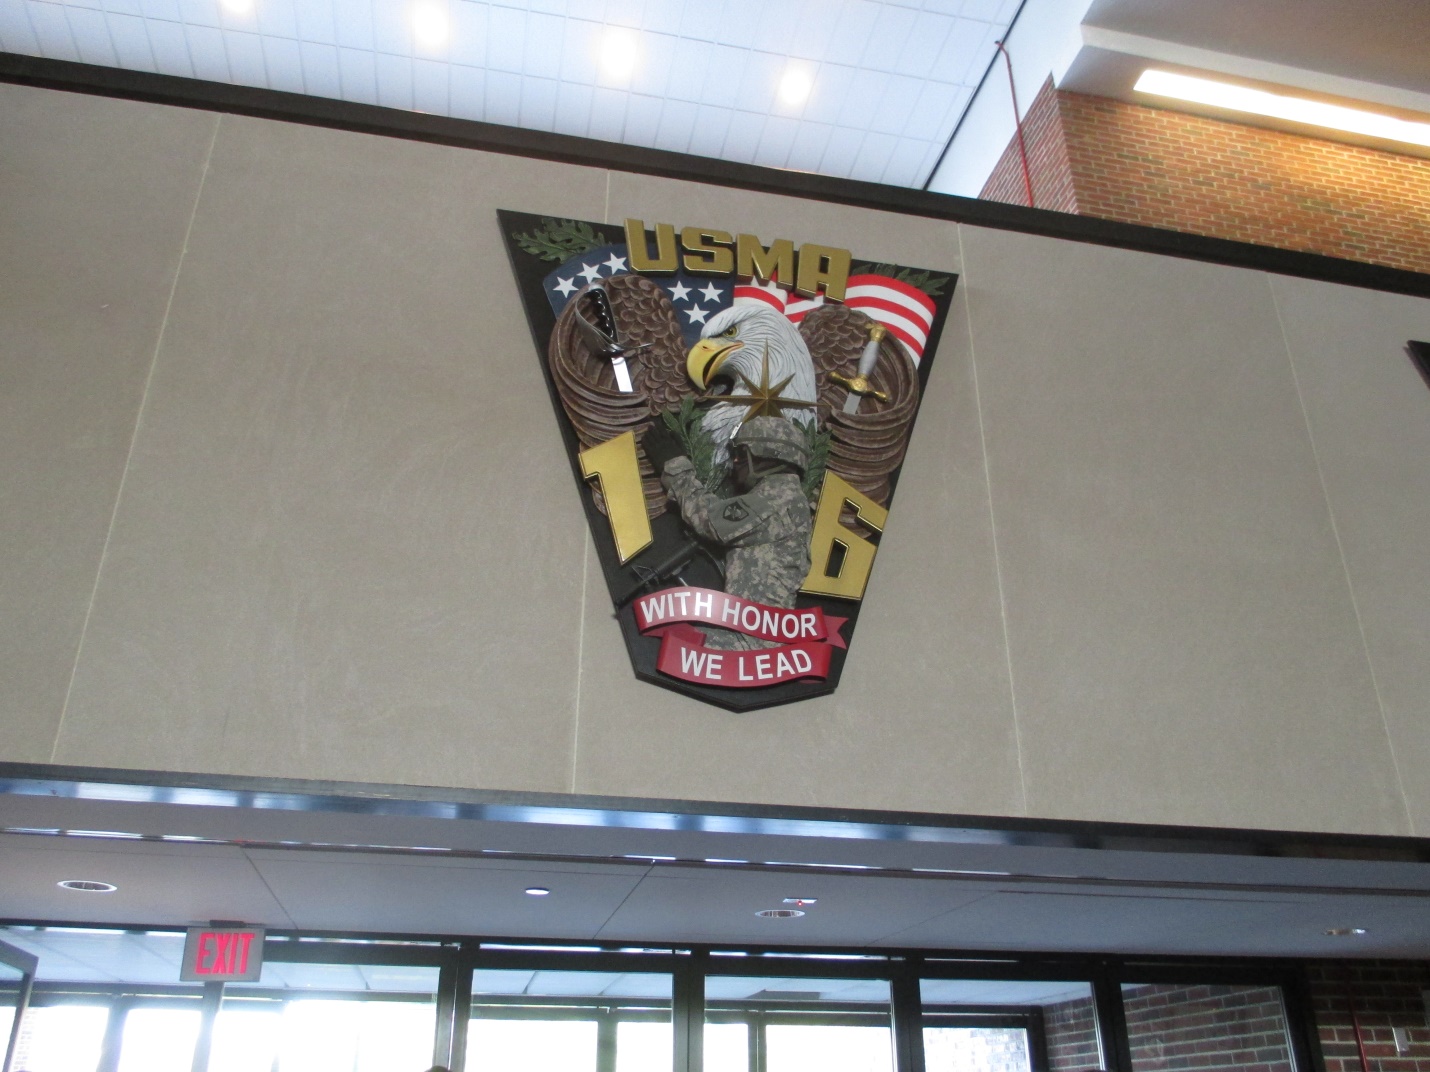 An eagle symbol 2016 on the wall for US military in west point new York. 